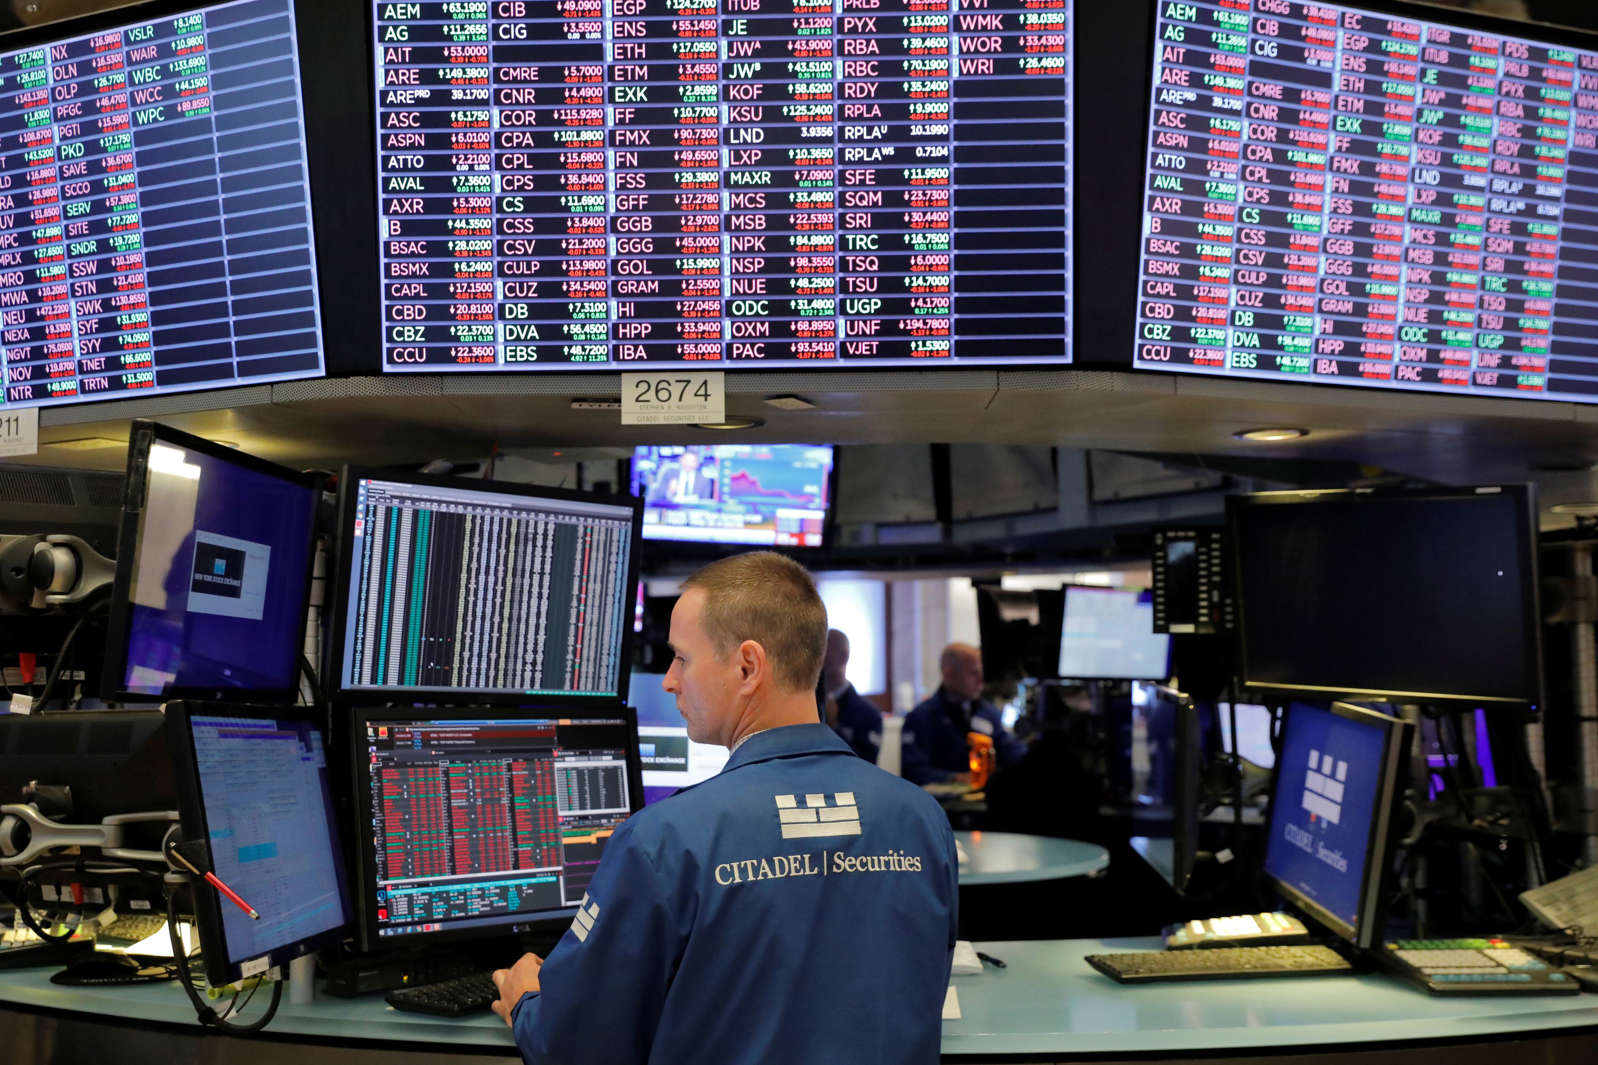 A trader works on the trading floor at the New York Stock Exchange (NYSE) in New York City, U.S., September 3, 2019. REUTERS/Andrew Kelly